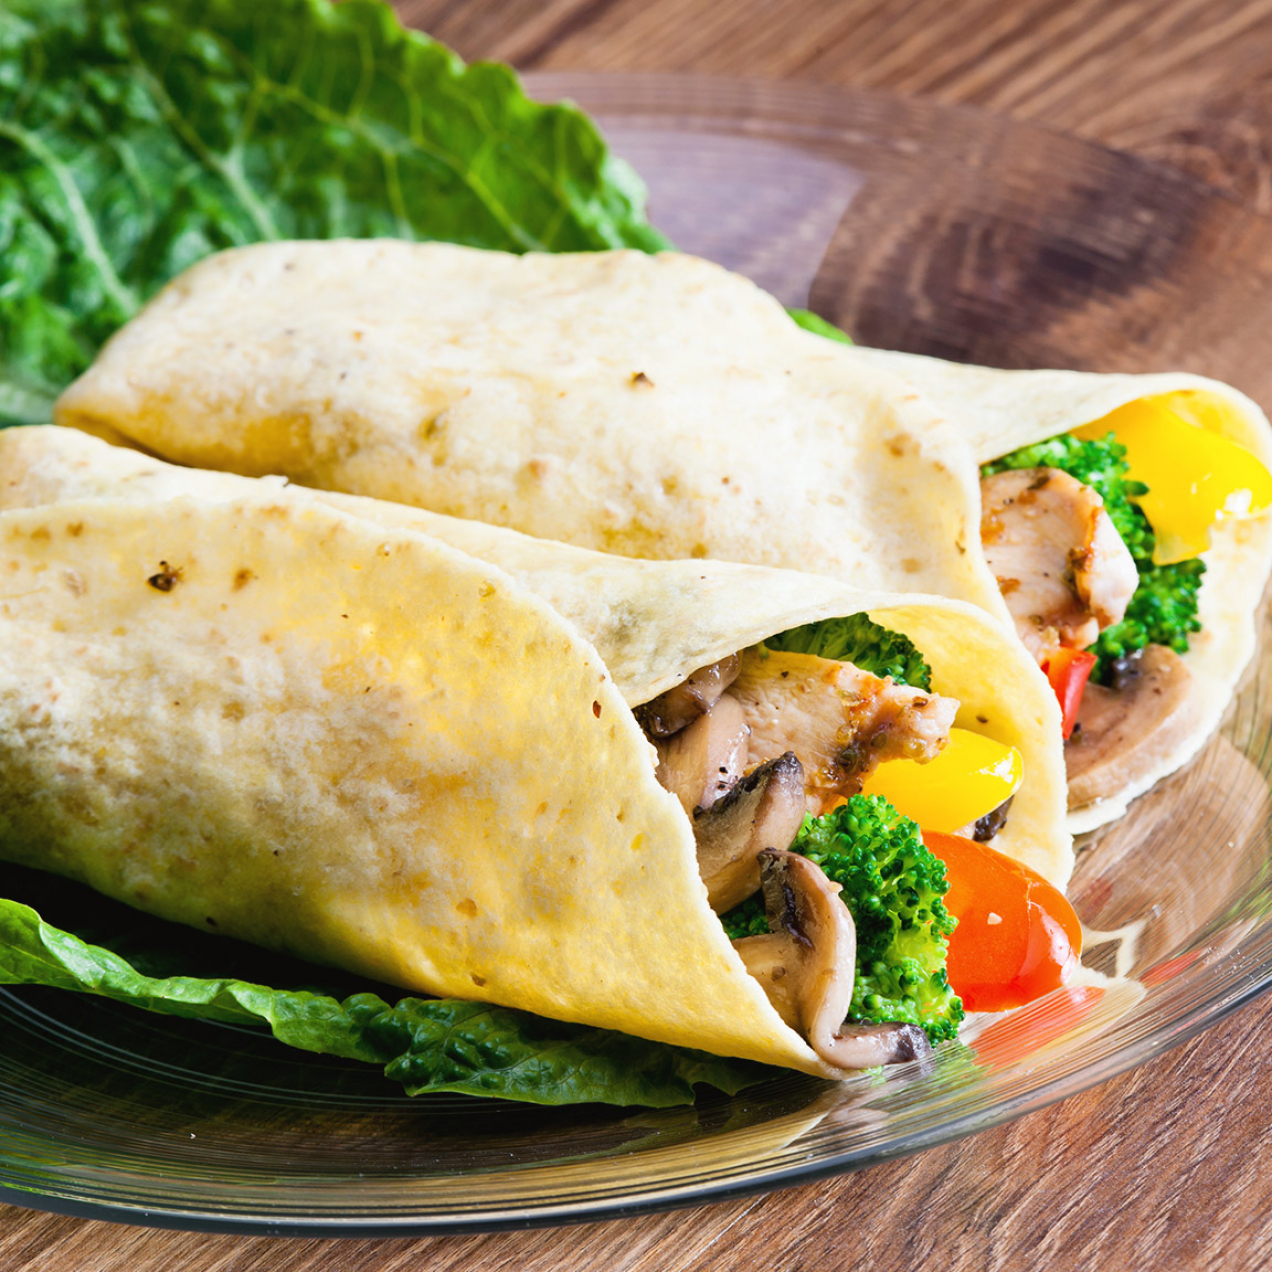 Chicken wrap with mushrooms and paprika